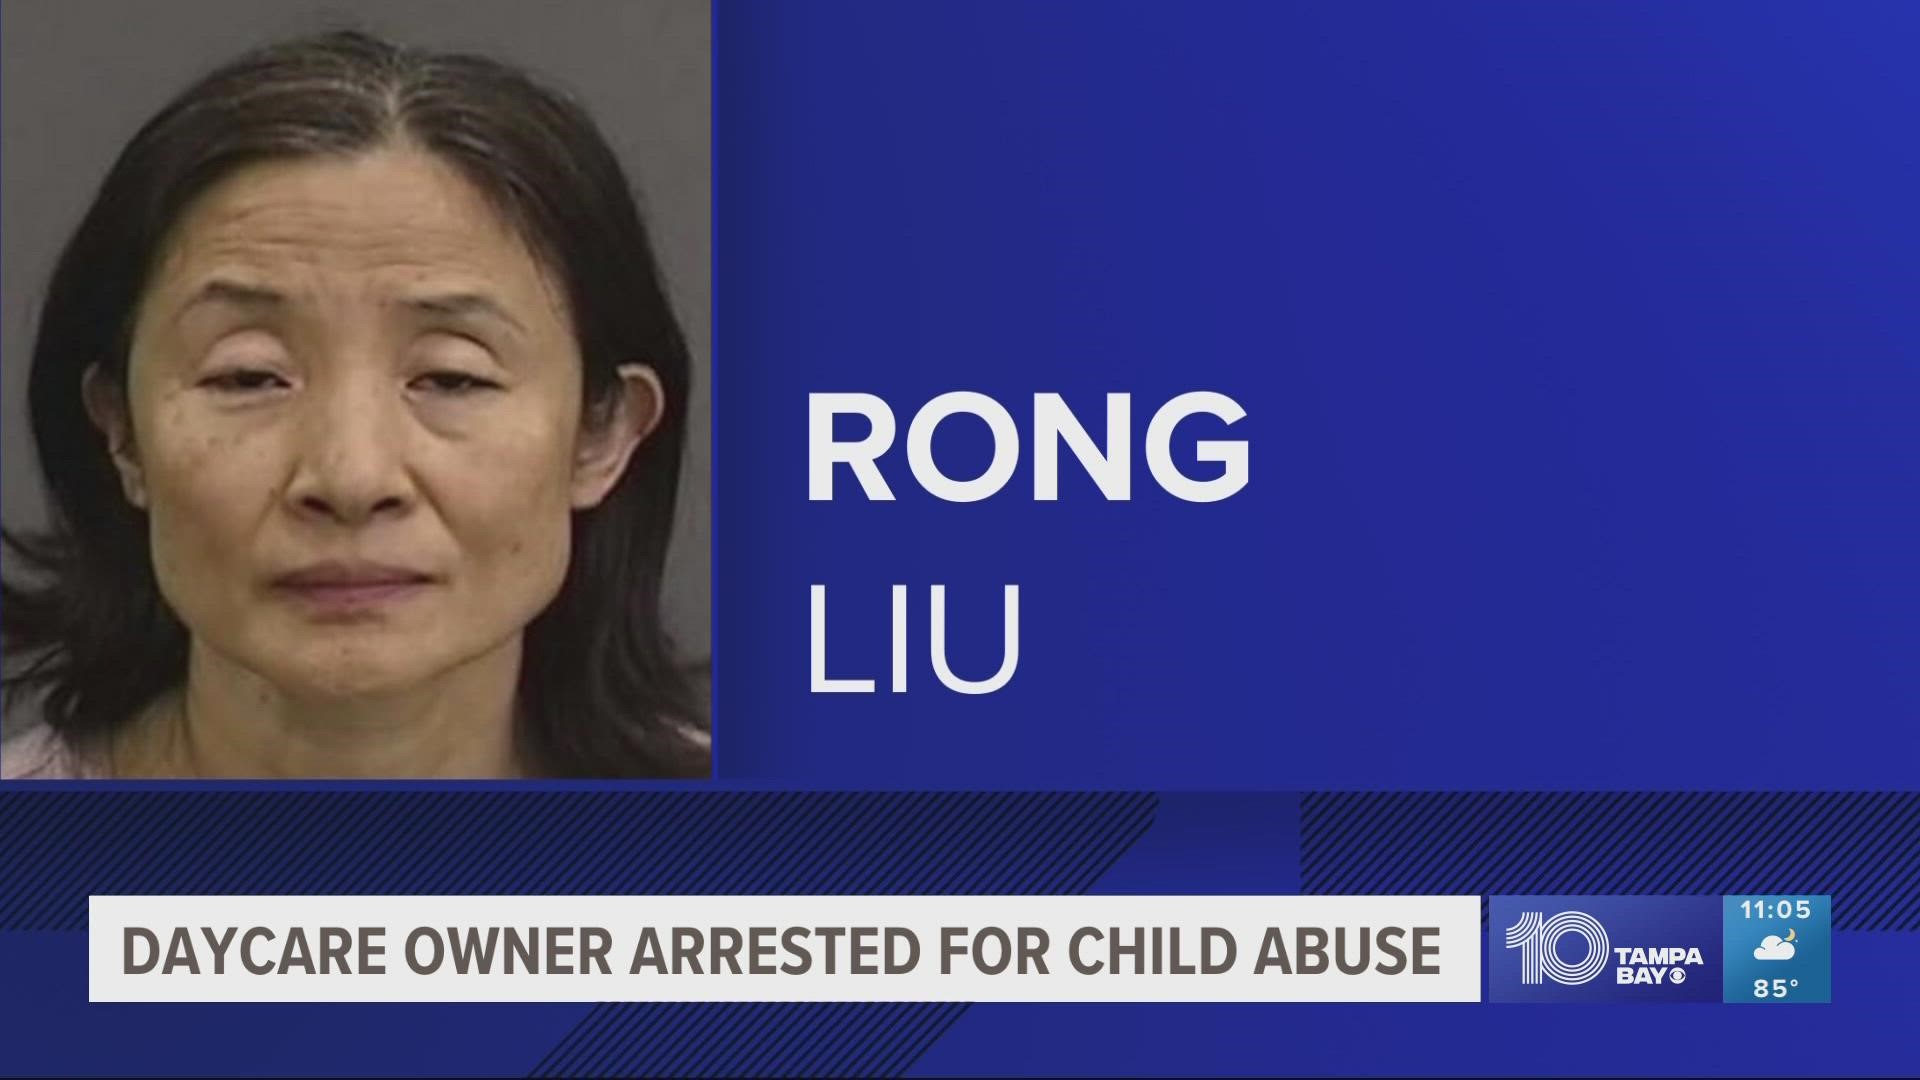 The 51-year-old woman reportedly abused a child while attempting to make them take a nap.